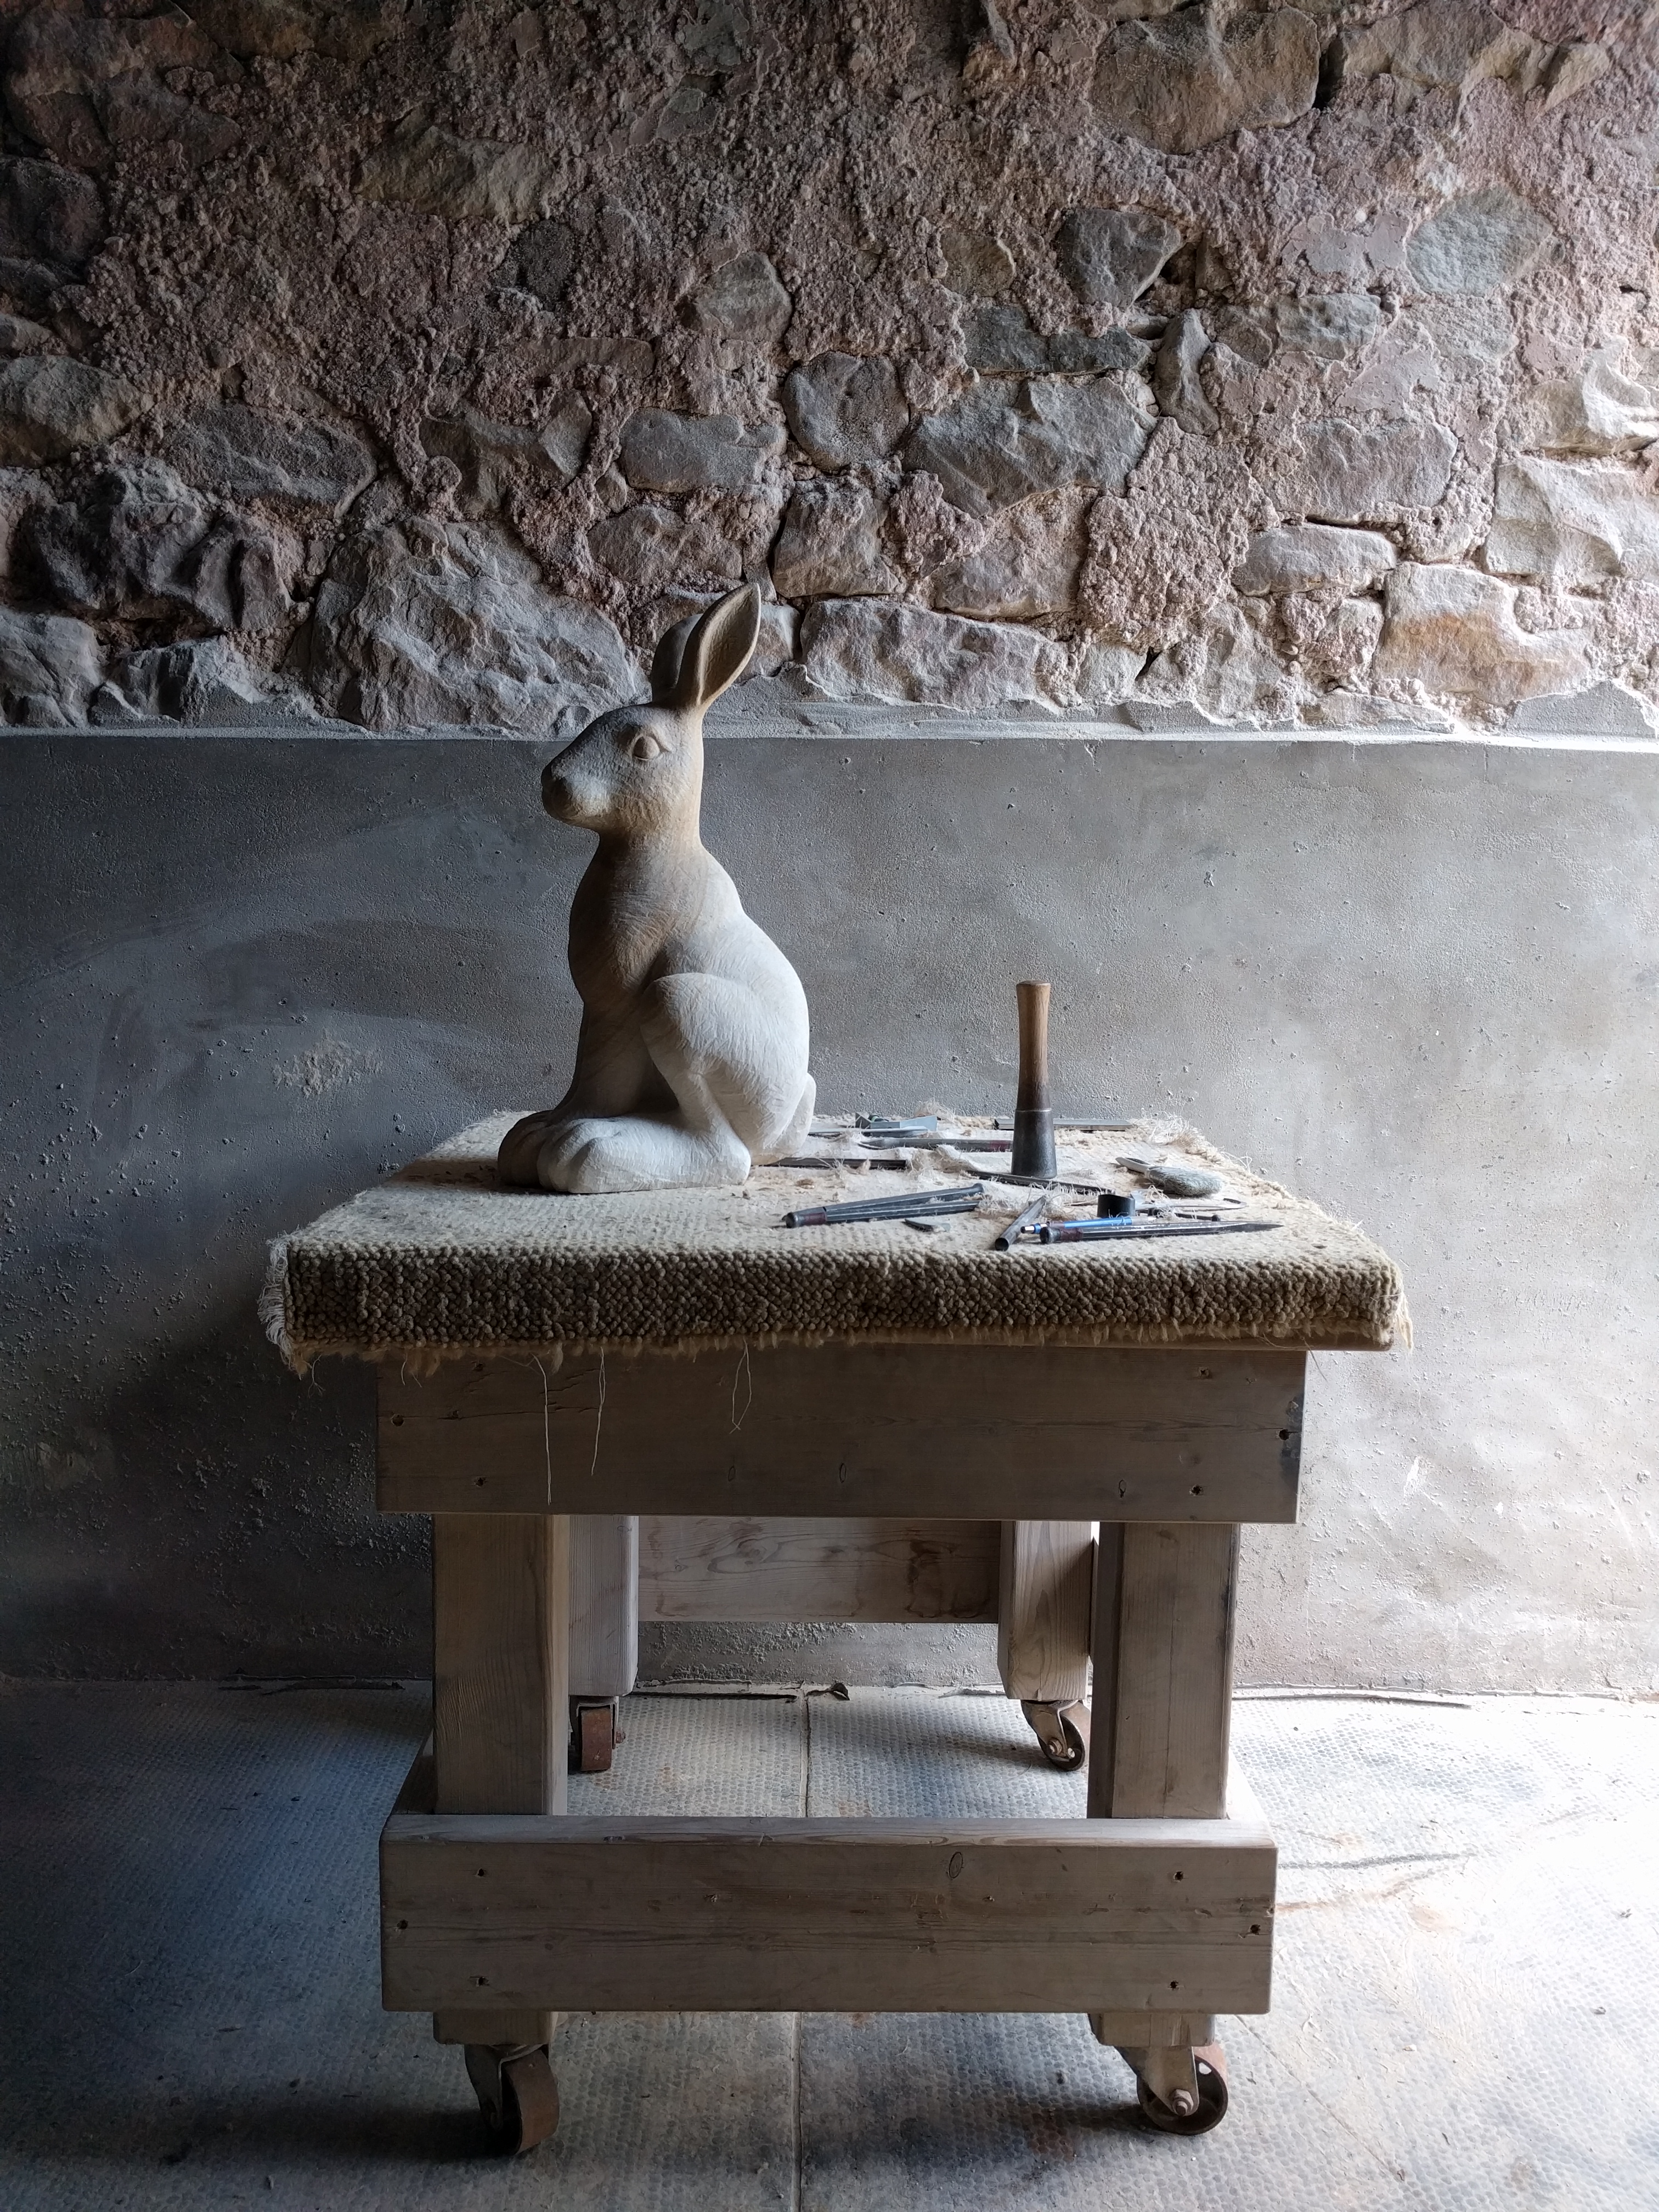 Northumbrian Stone Carver, Luke Batchelor, carving of a hare